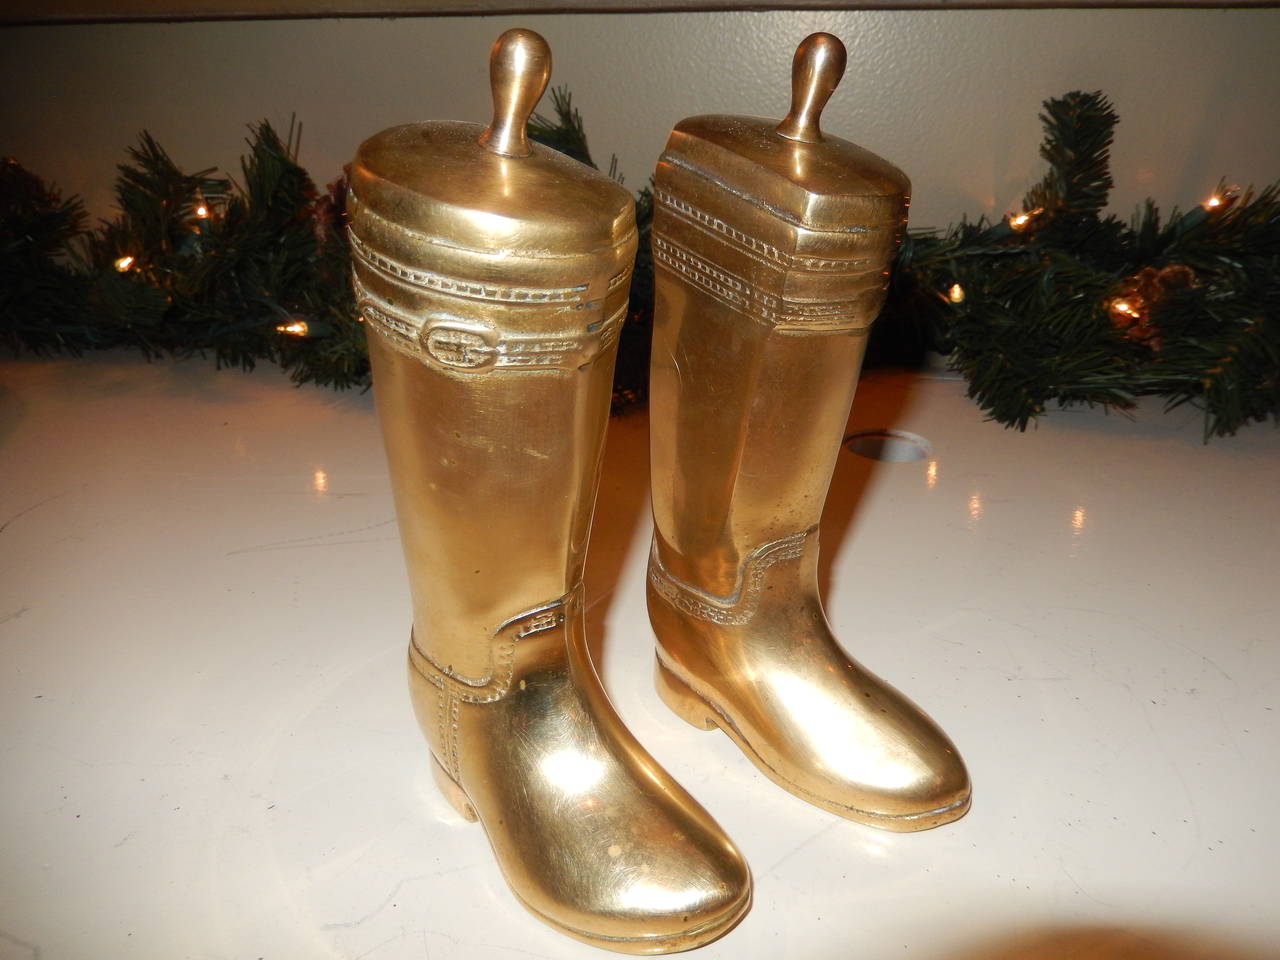 Pair of well detailed brass riding boots/book ends.